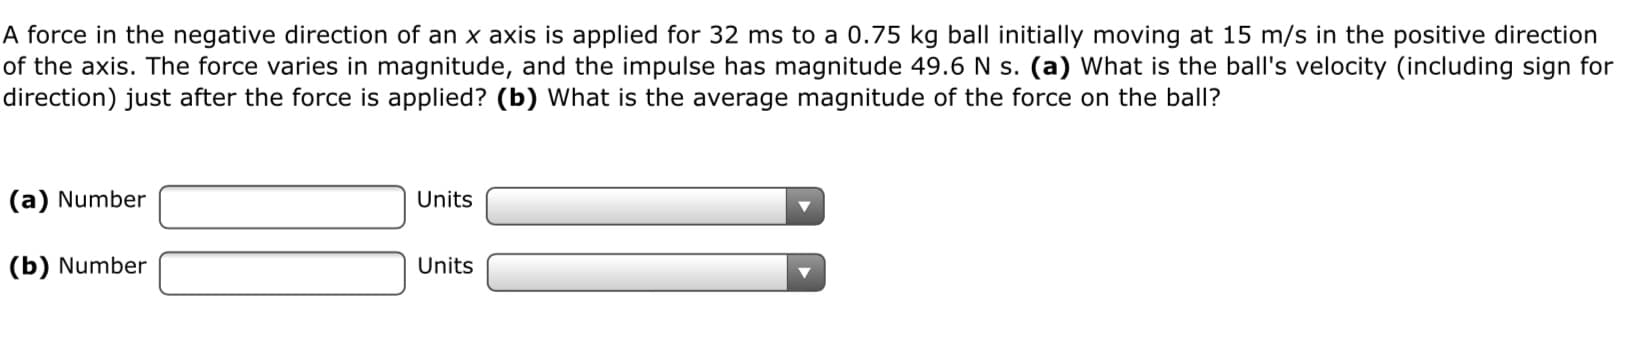 A force in the negative direction of an x axis is applied for 32 ms to a 0.75 kg ball initially moving at 15 m/s in the positive direction
of the axis. The force varies in magnitude, and the impulse has magnitude 49.6 N s. (a) What is the ball's velocity (including sign for
direction) just after the force is applied? (b) What is the average magnitude of the force on the ball?
(a) Number
Units
(b) Number
Units
